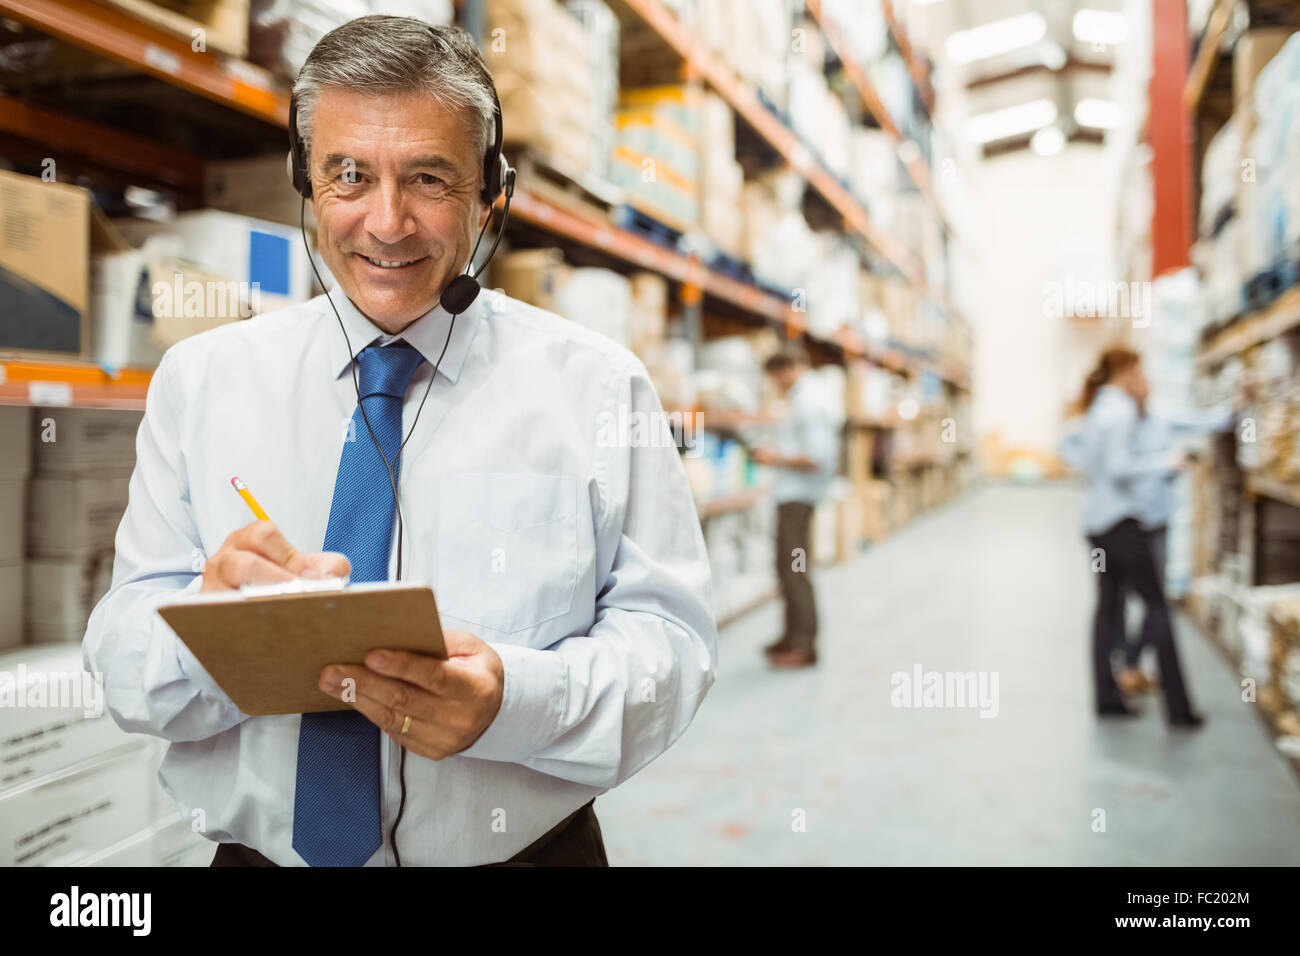 Smiling warehouse manager writing on clipboard Stock Photo